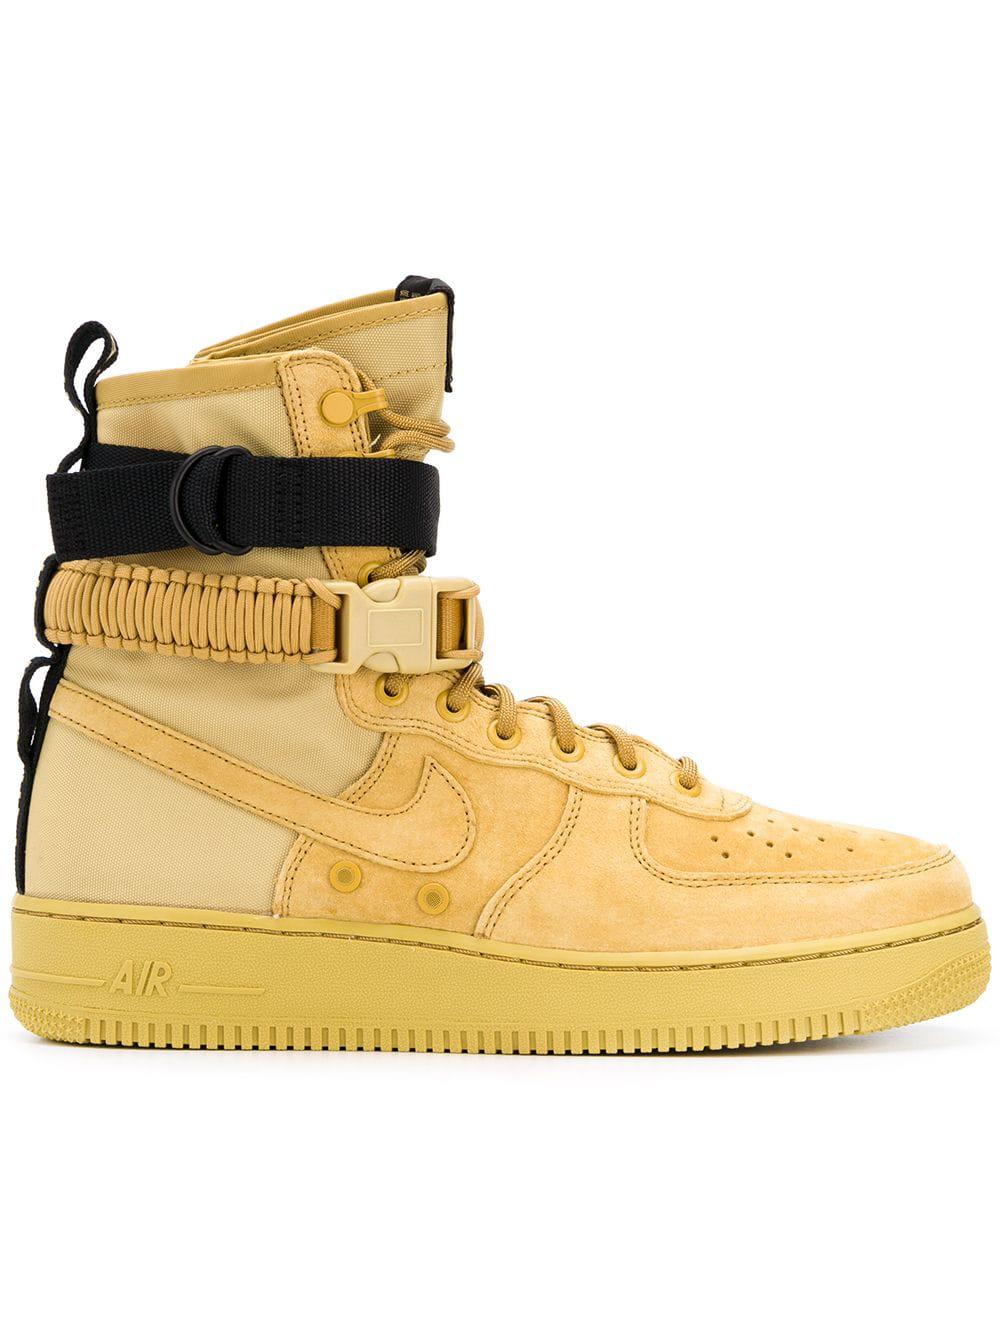 Nike Synthetic Sf Air Force 1 High Top Sneakers in Yellow & Orange (Yellow)  for Men | Lyst Australia